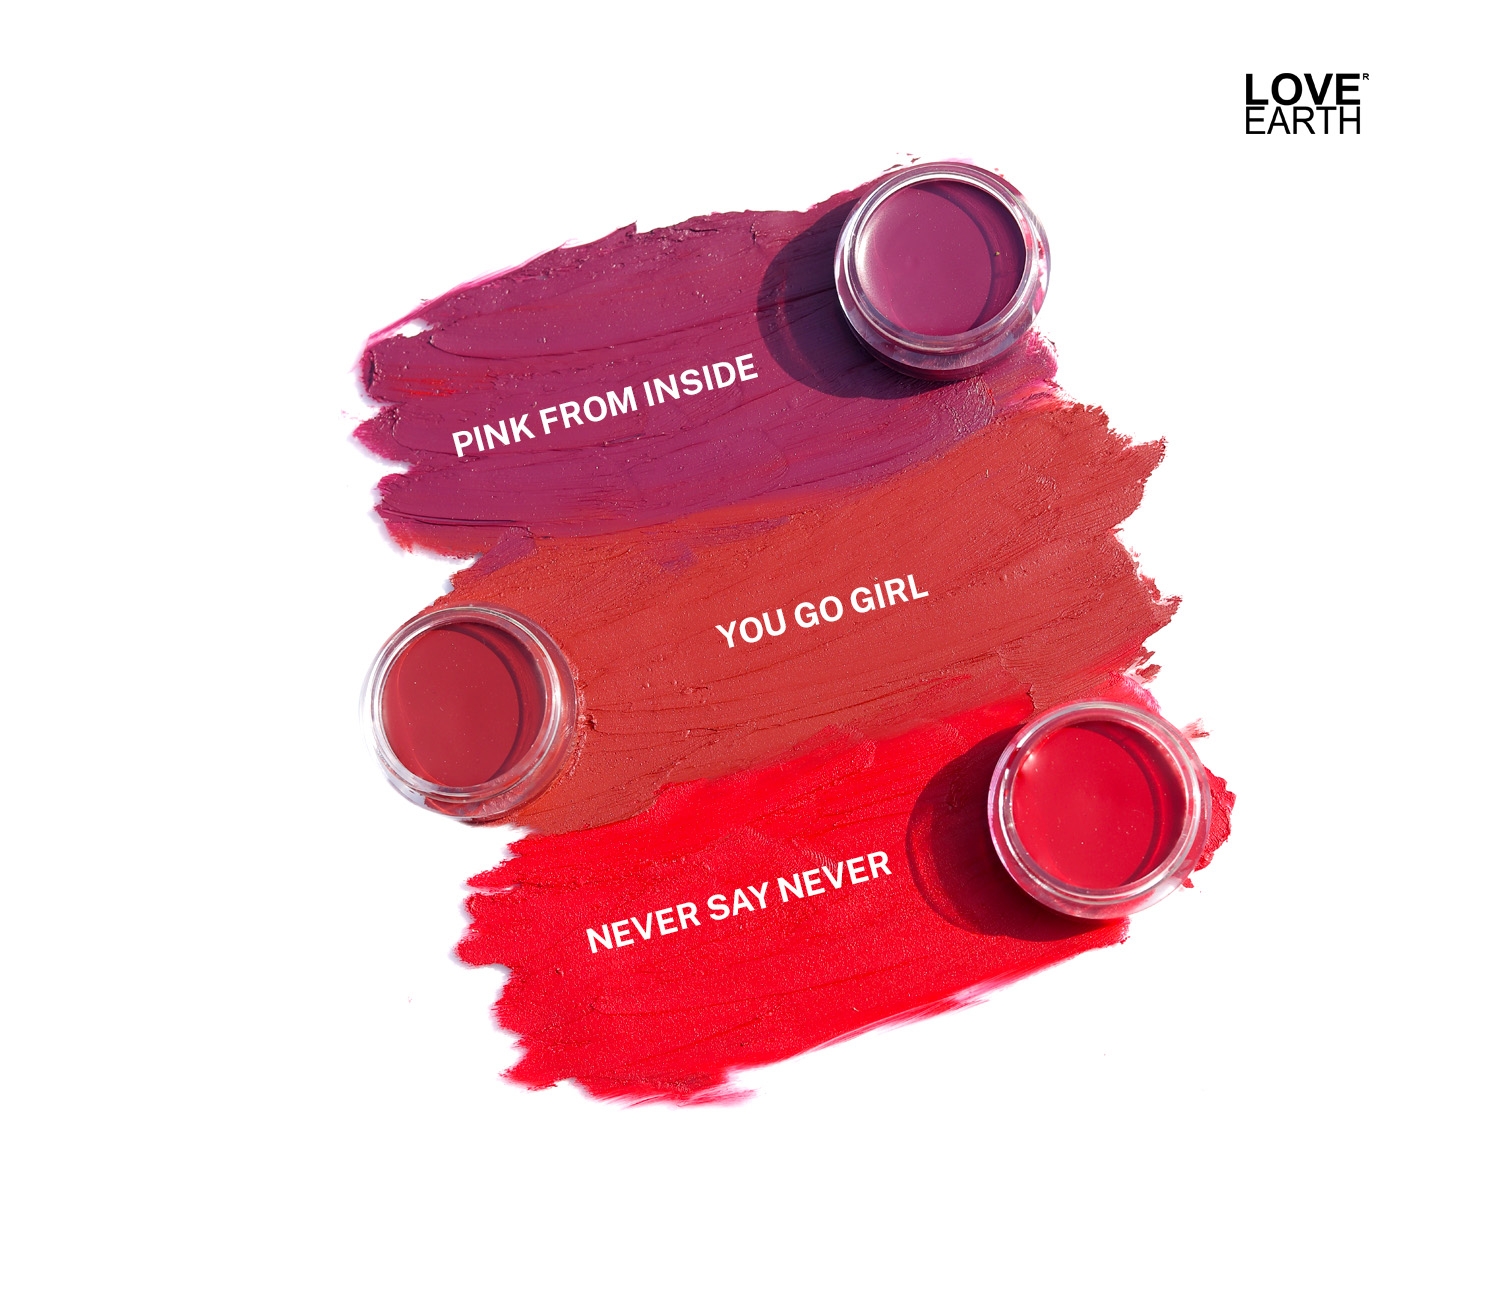 LOVE EARTH | Love Earth Lip Tint & Cheek Tint Multipot - Never Say Never With Richness Of Essential Oils & Vitamin E For Lips, Eyelids And Cheeks, Creamy Matte - Bright Red 1